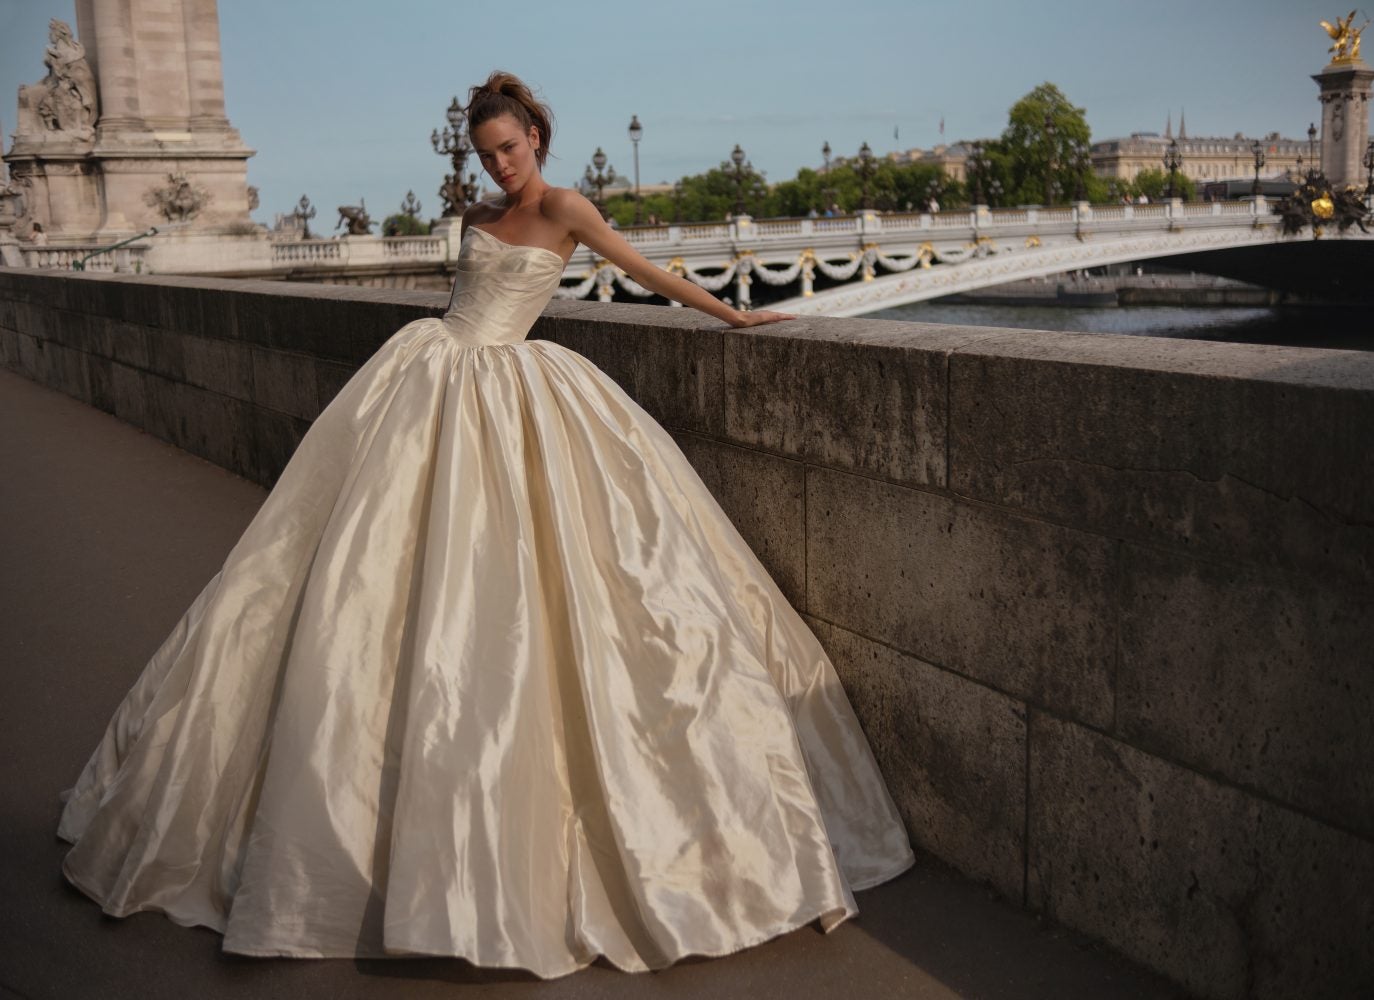 Premium Photo | Female model in wedding gown and accessories standing on  terrace